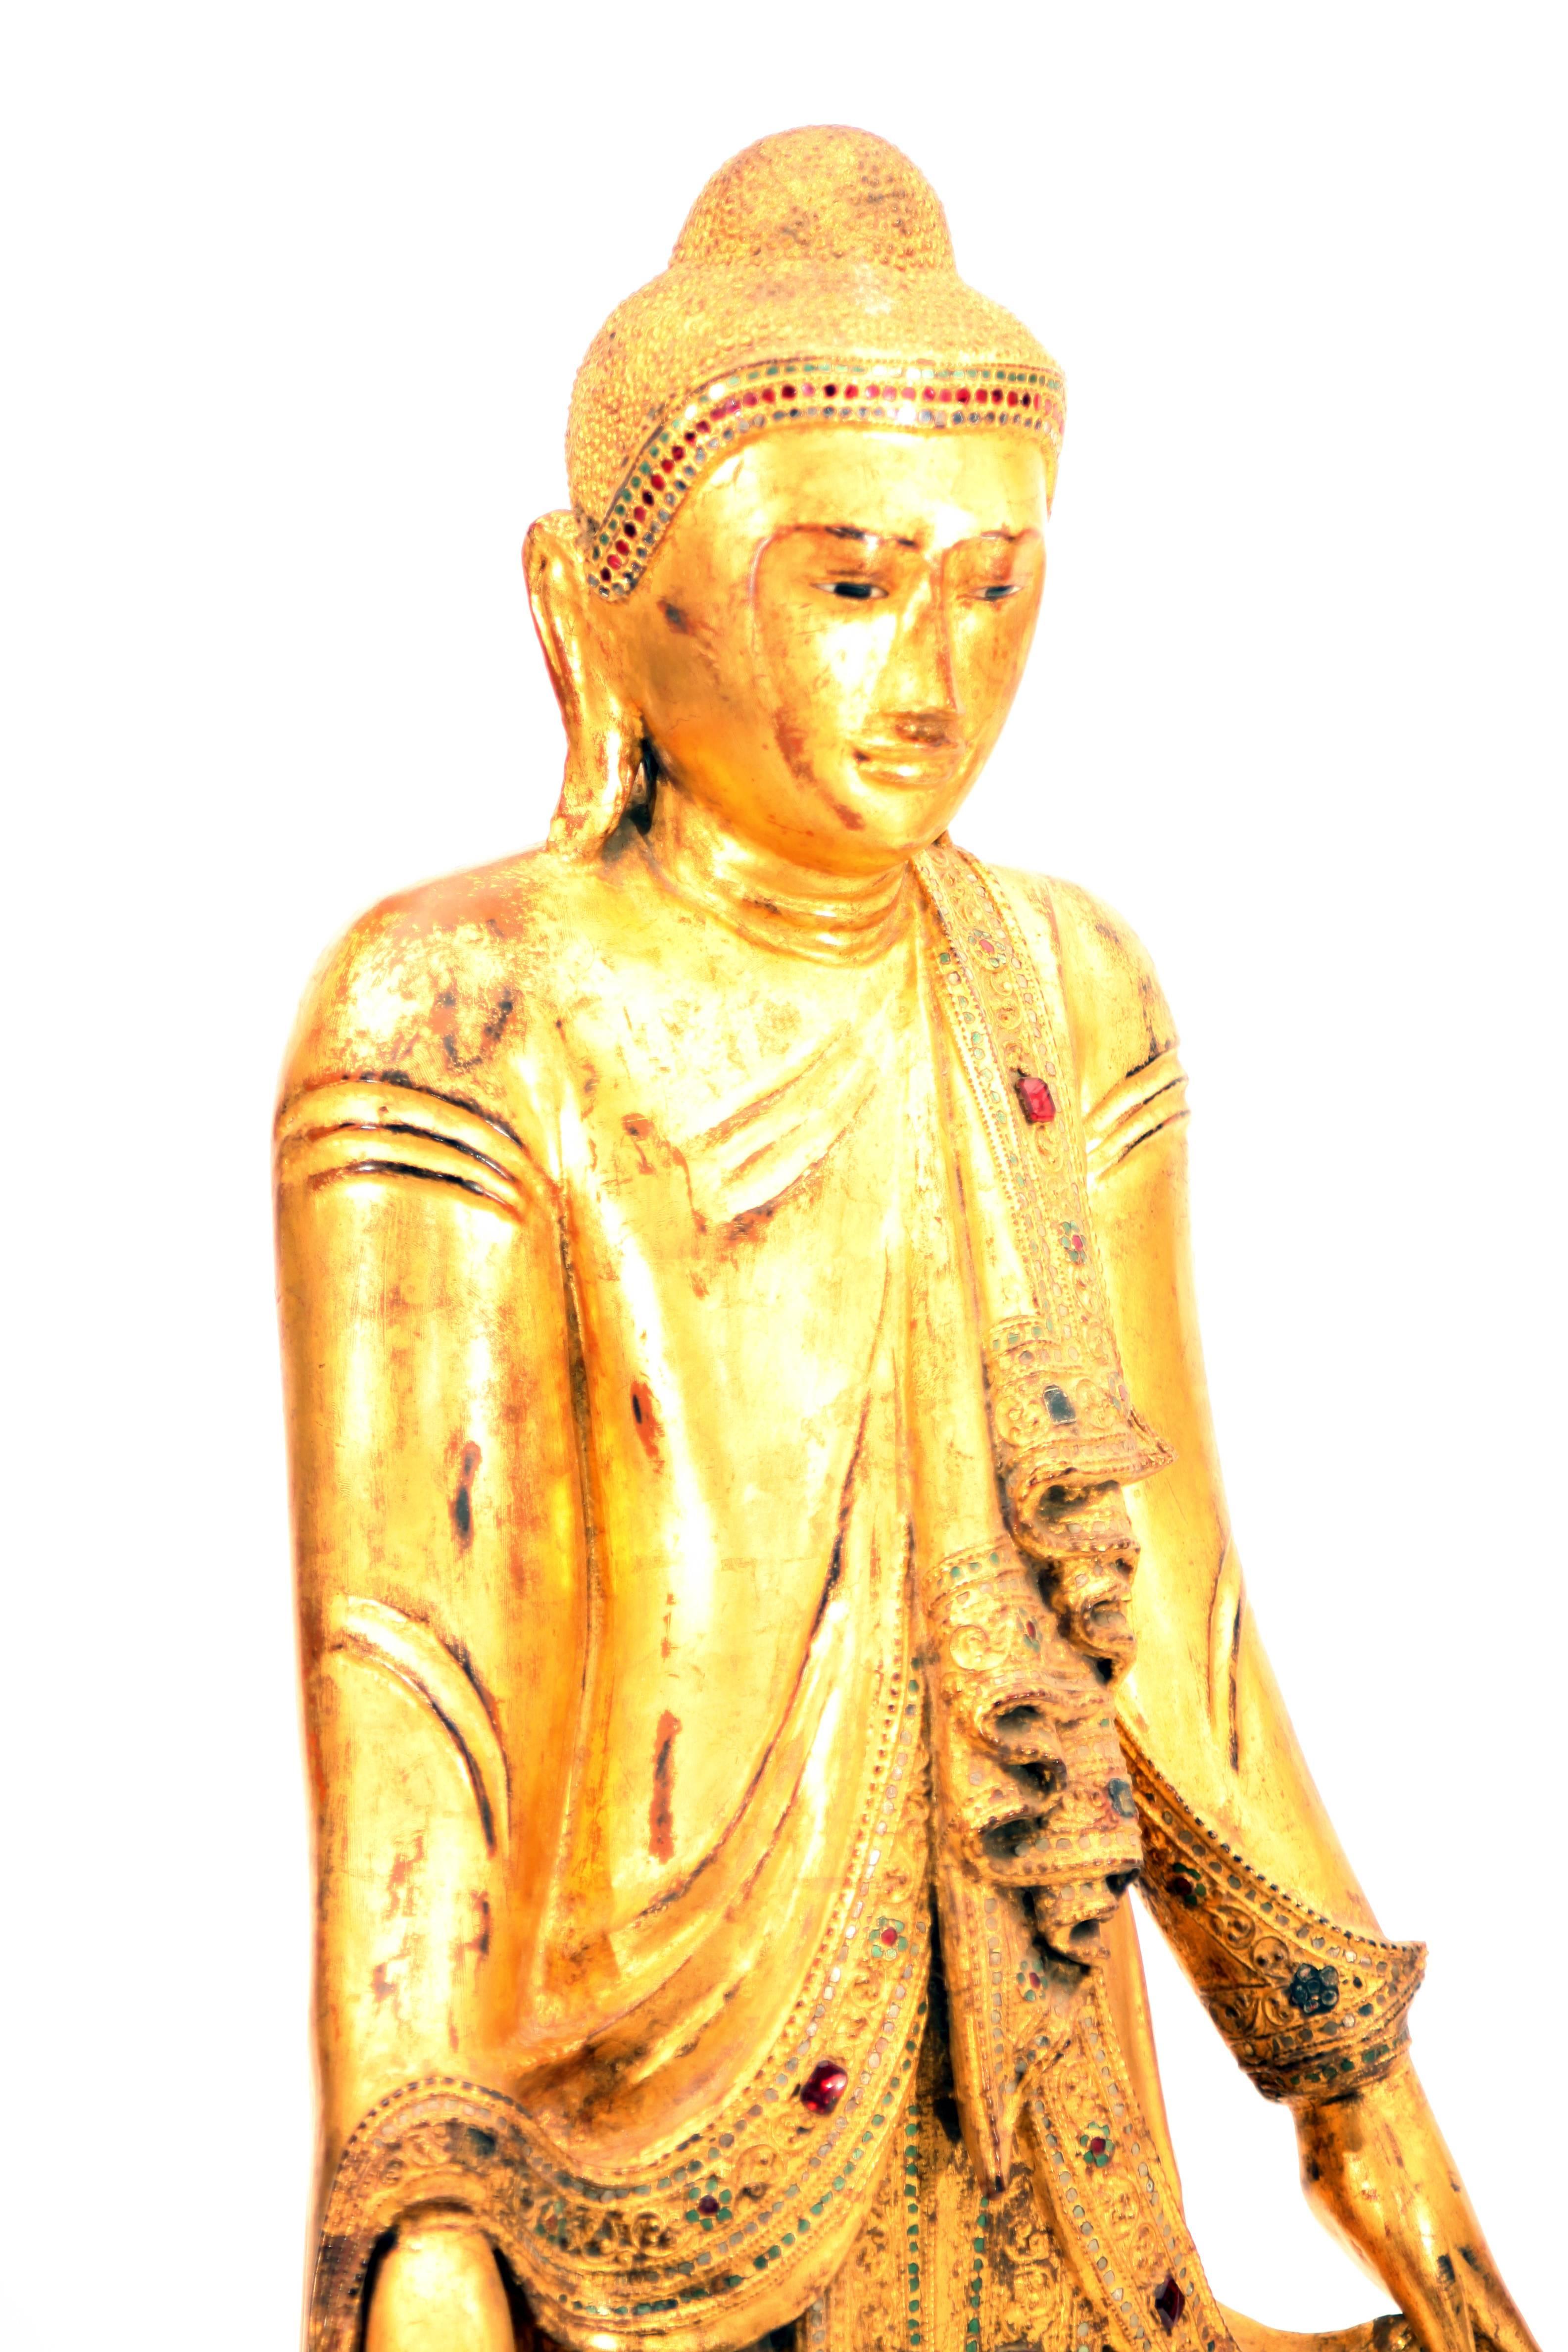 Standing on a lotus pedestal, with both hands clasping his robe, finely carved with flows and frills of robe and decorated with colored glass, the Buddha with serene expression, downcast eyes below arched eyebrows, aquiline nose, smiling lips,